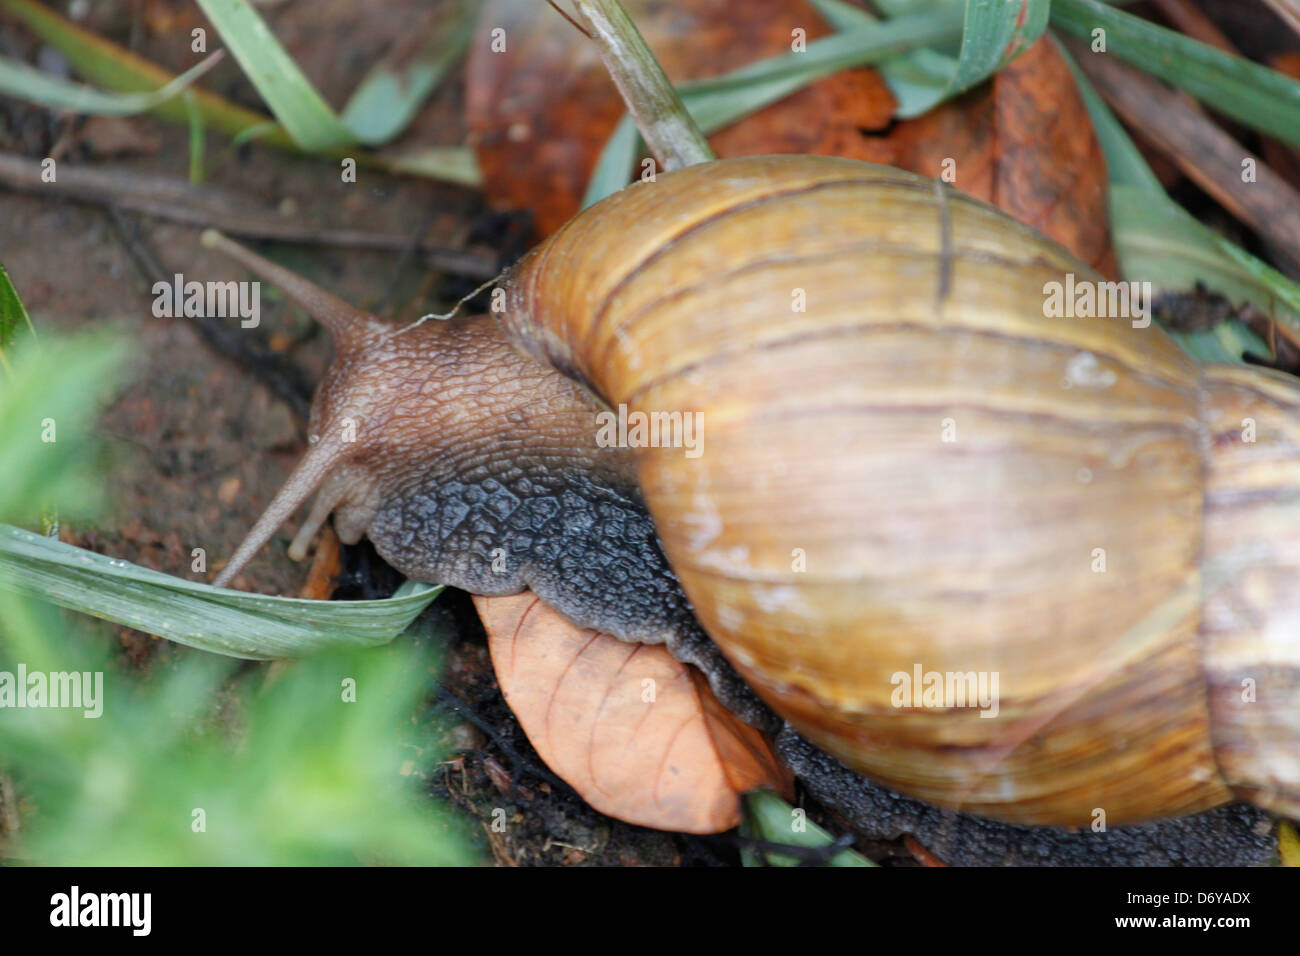 The Gastropod in The Vegetables Garden. Stock Photo